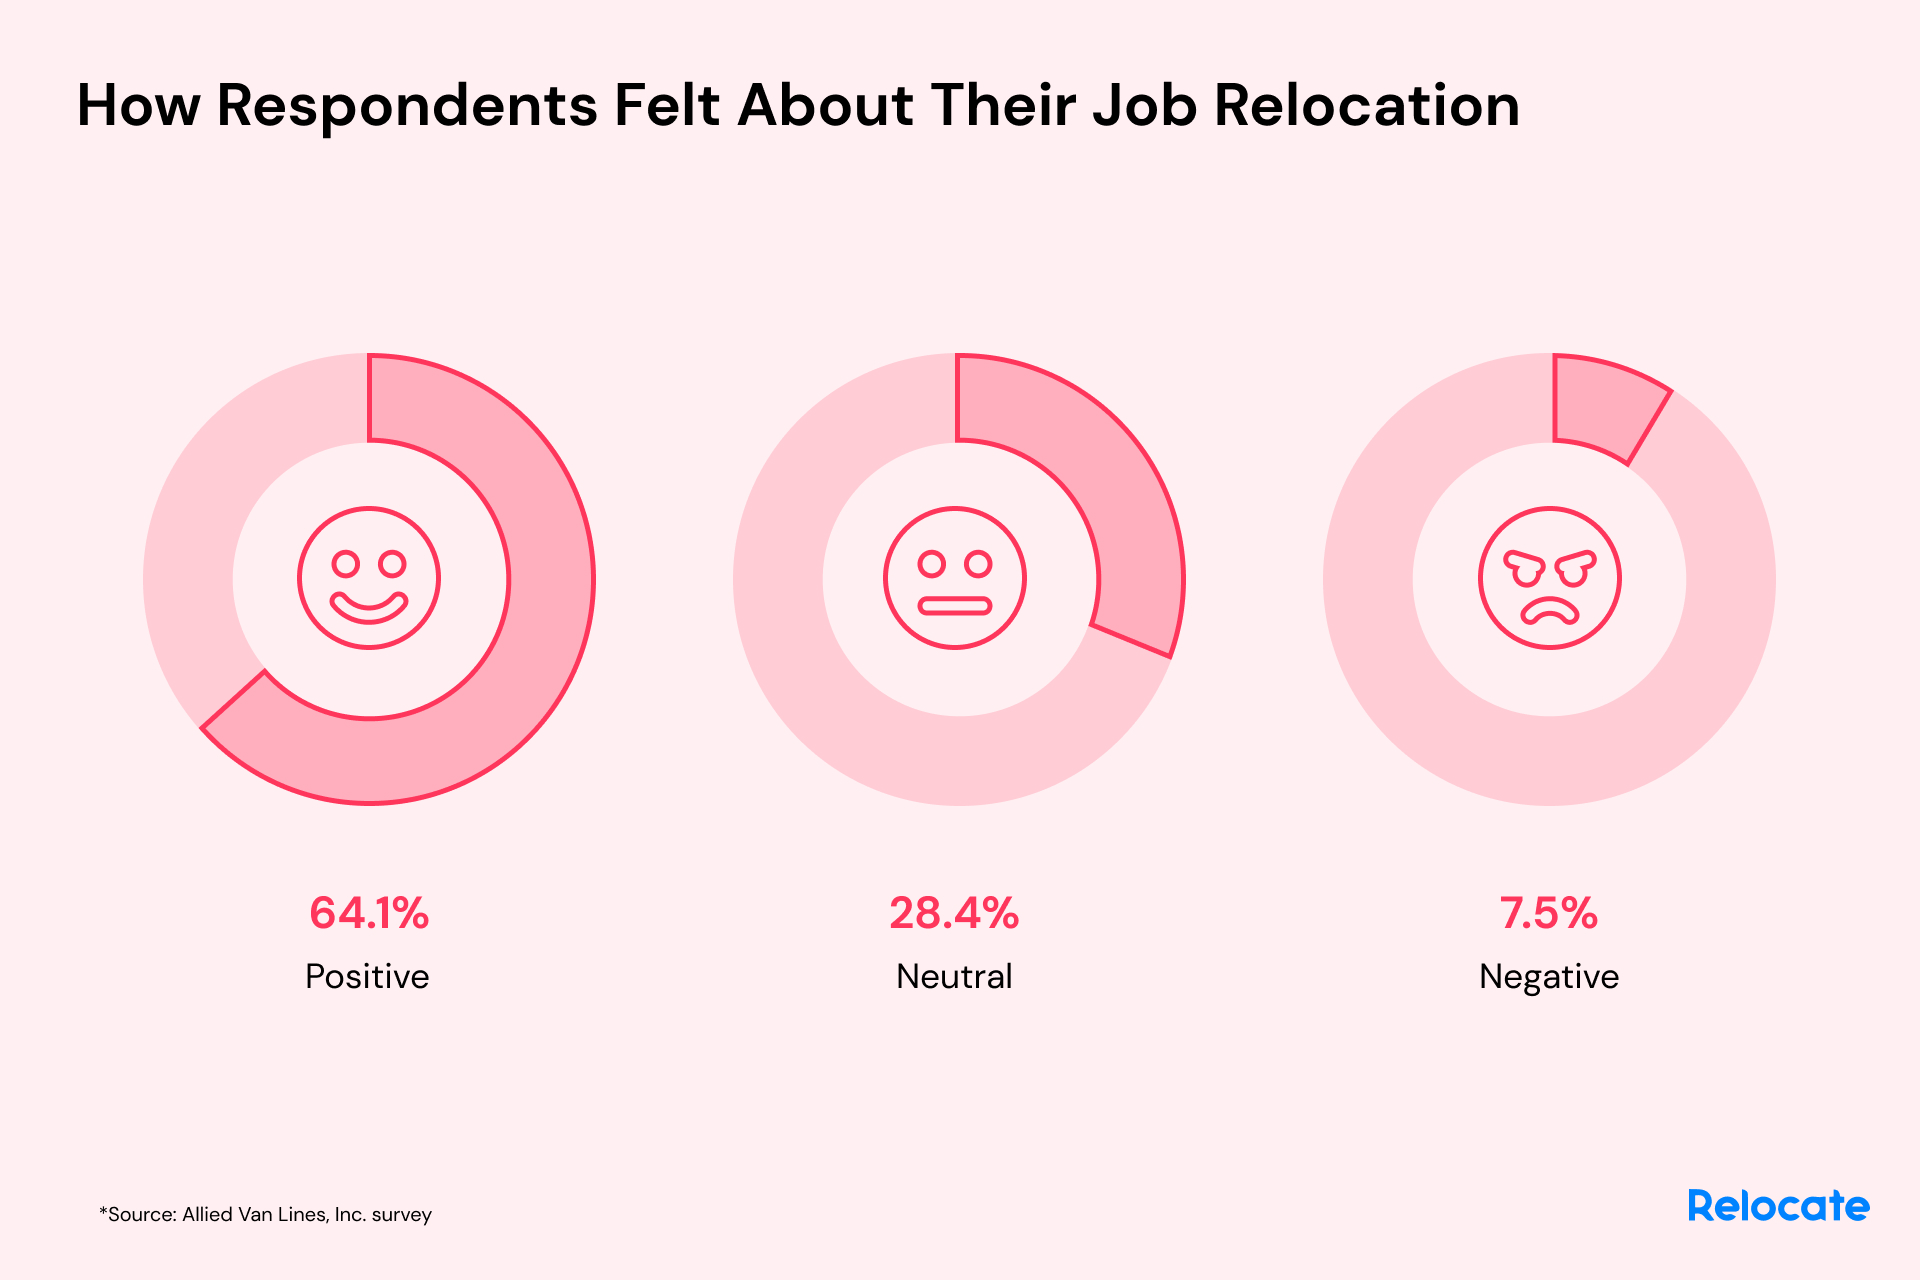 how respondents felt about their job relocation (positive or negative percentage)